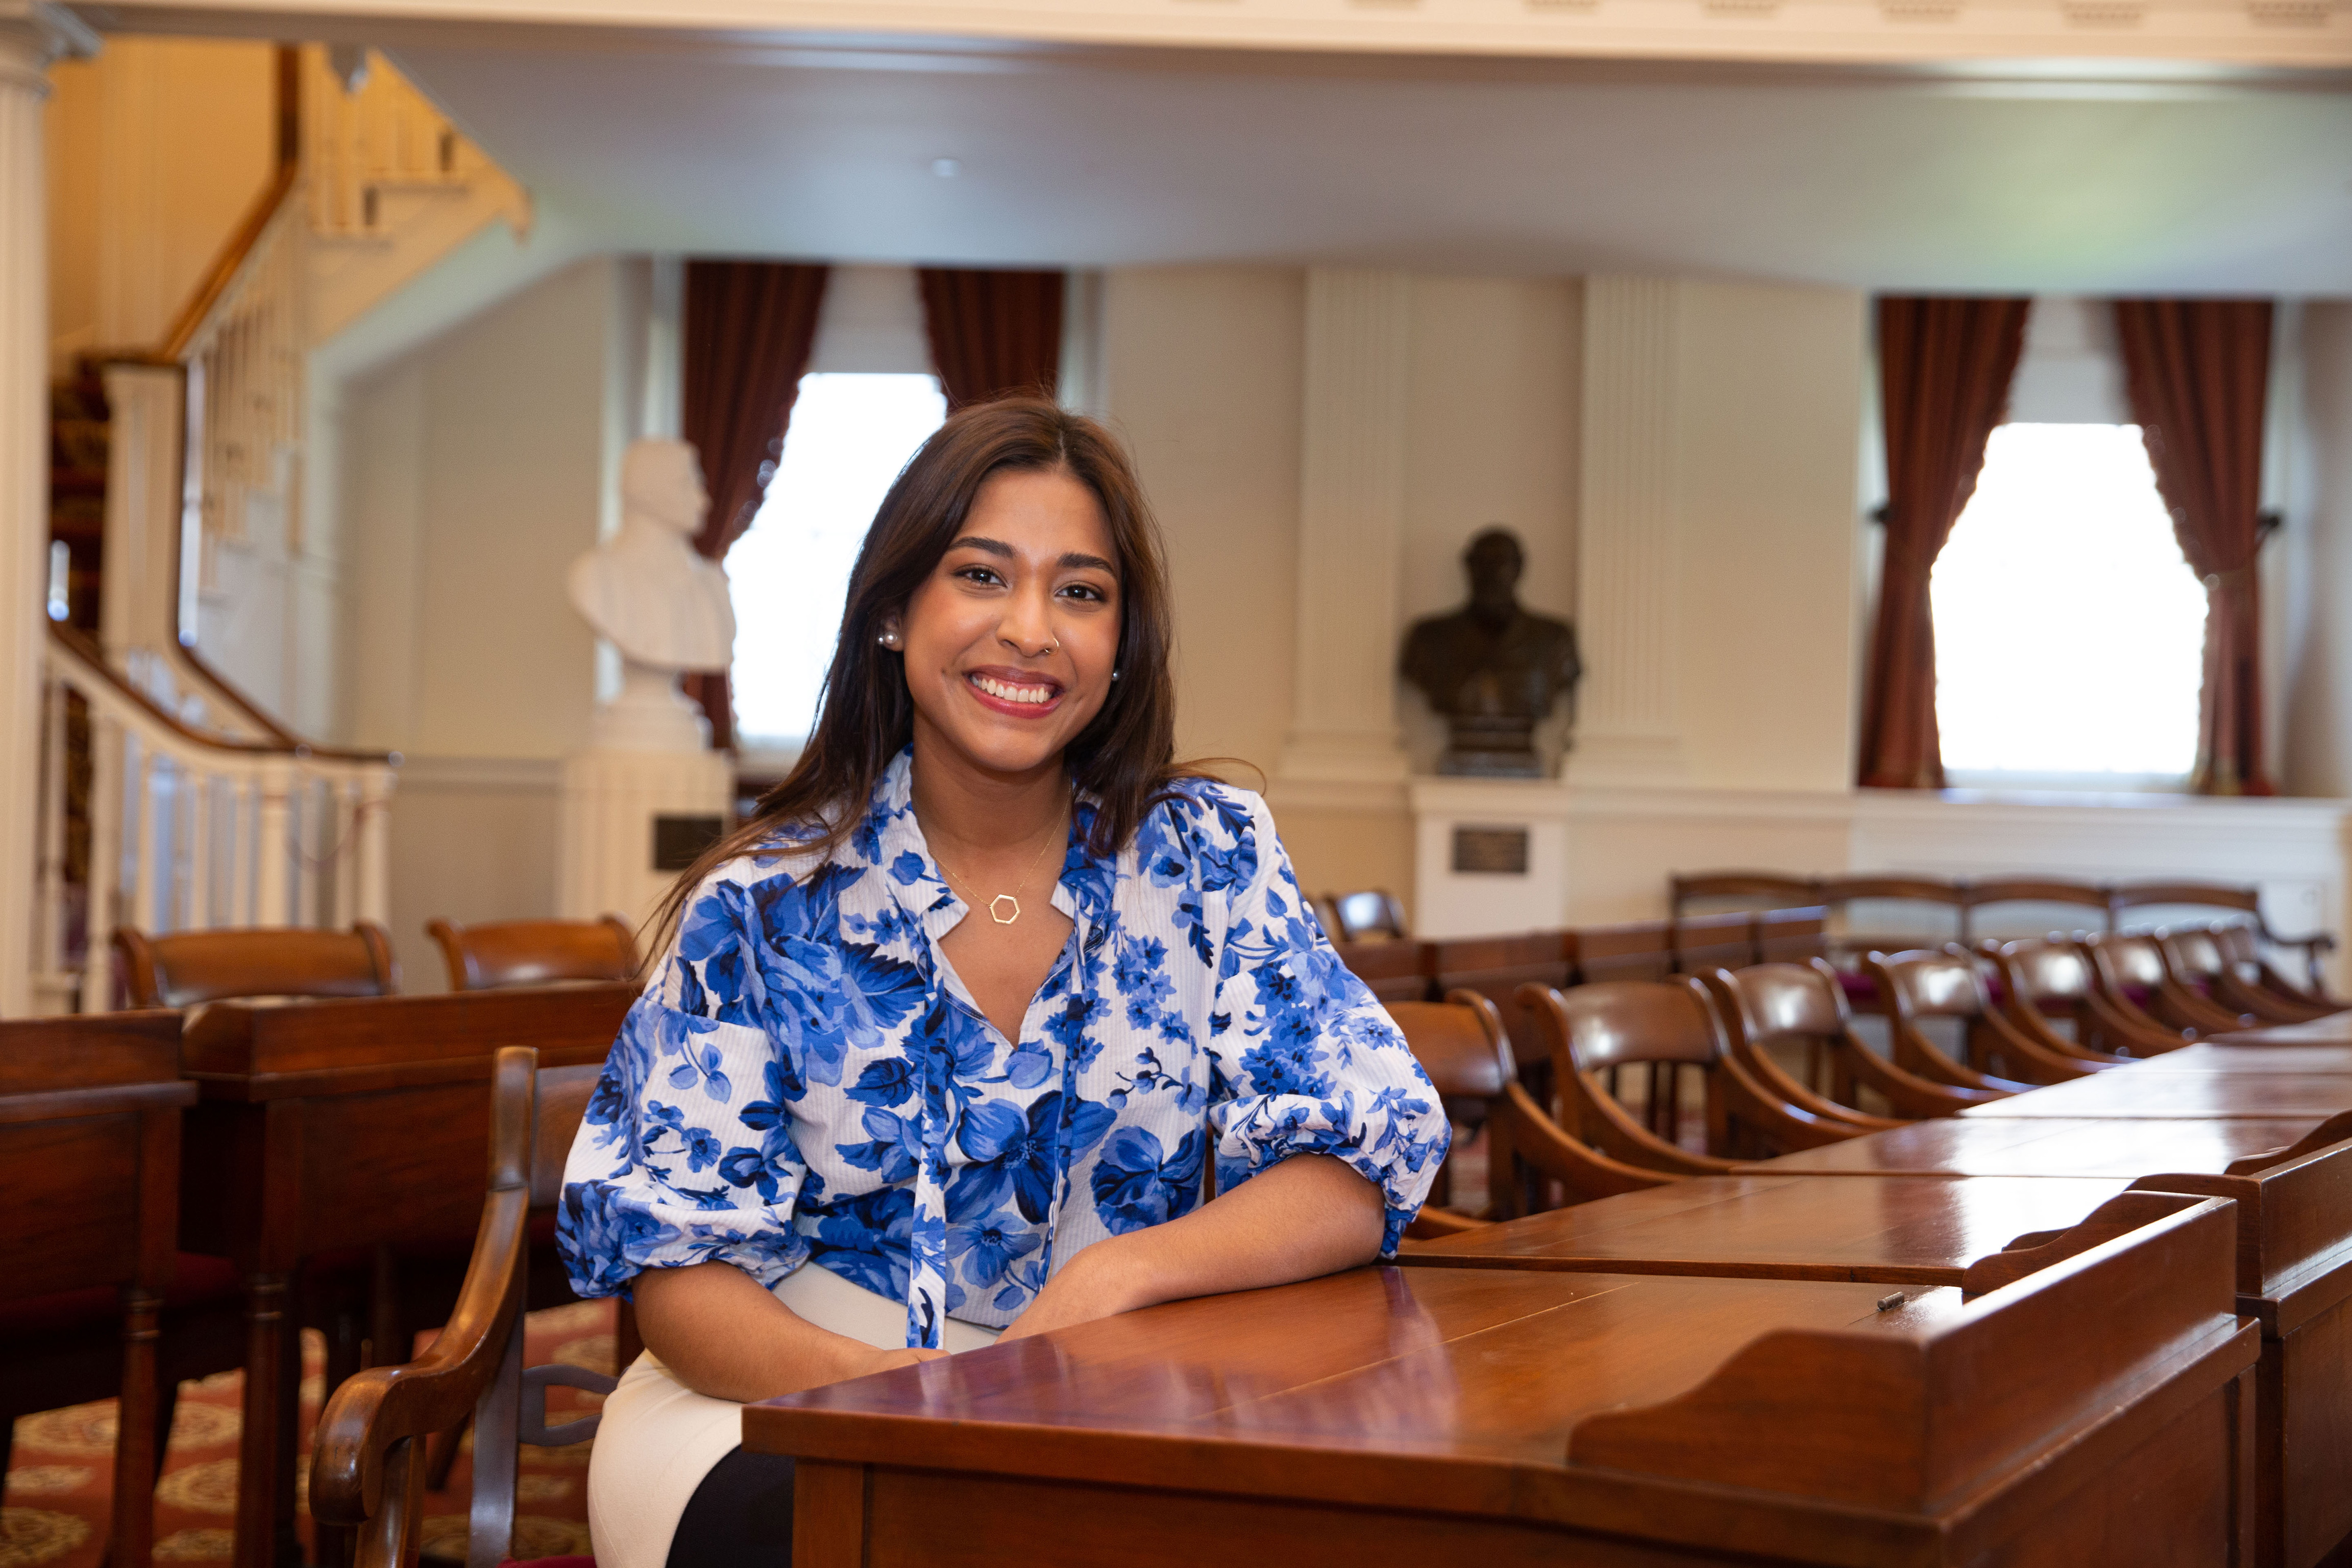 Sofhia Pineda Garay is exploring continuing her education with graduate school across subject areas including public policy, public administration and education administration. The Wilder School  dual-degree program  offering a master of public administration and juris doctorate are also on her radar.